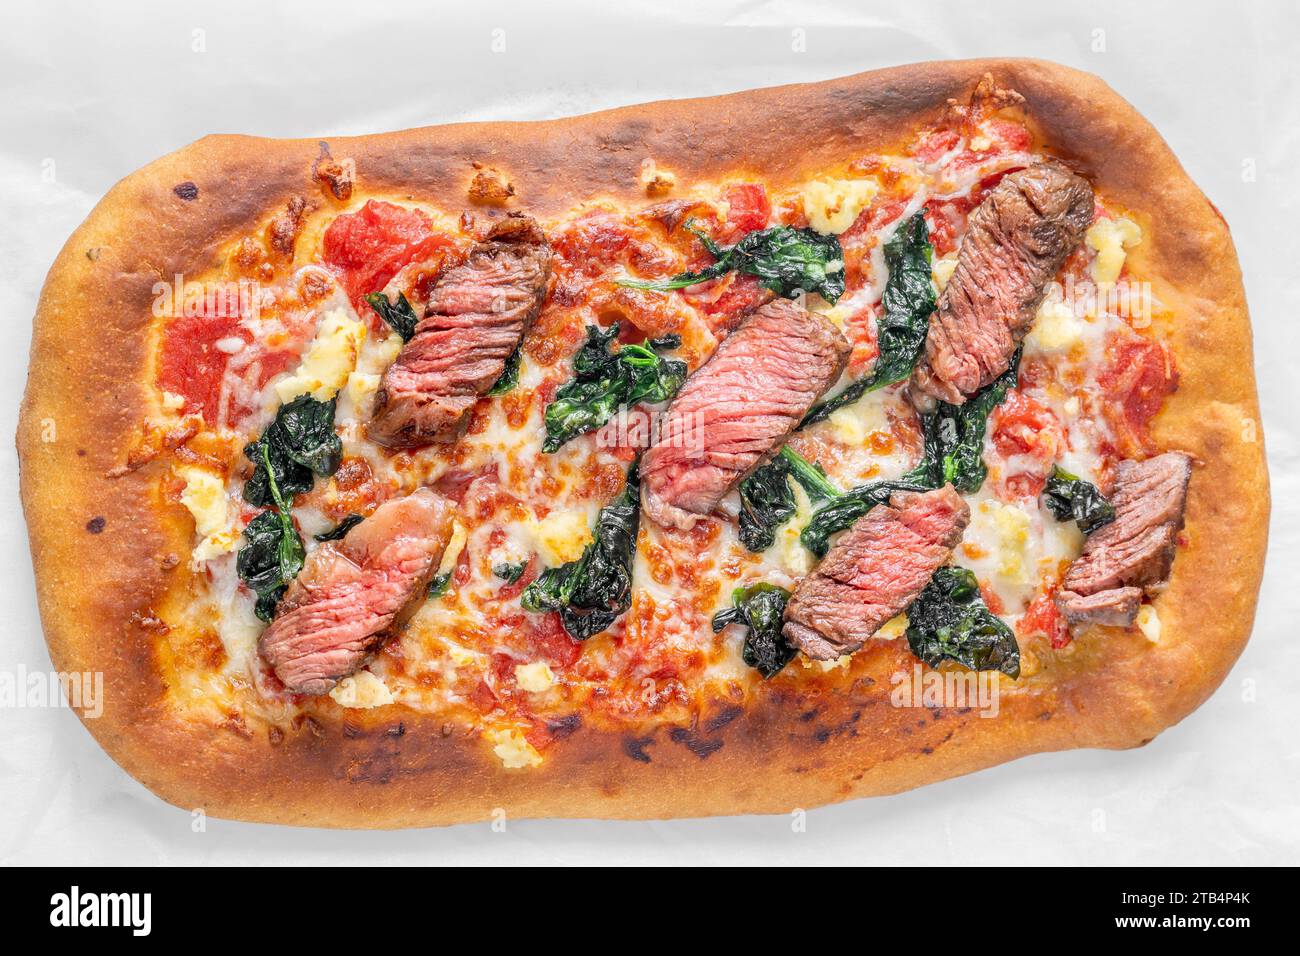 Beef steak focaccia with spinach and cheese Stock Photo